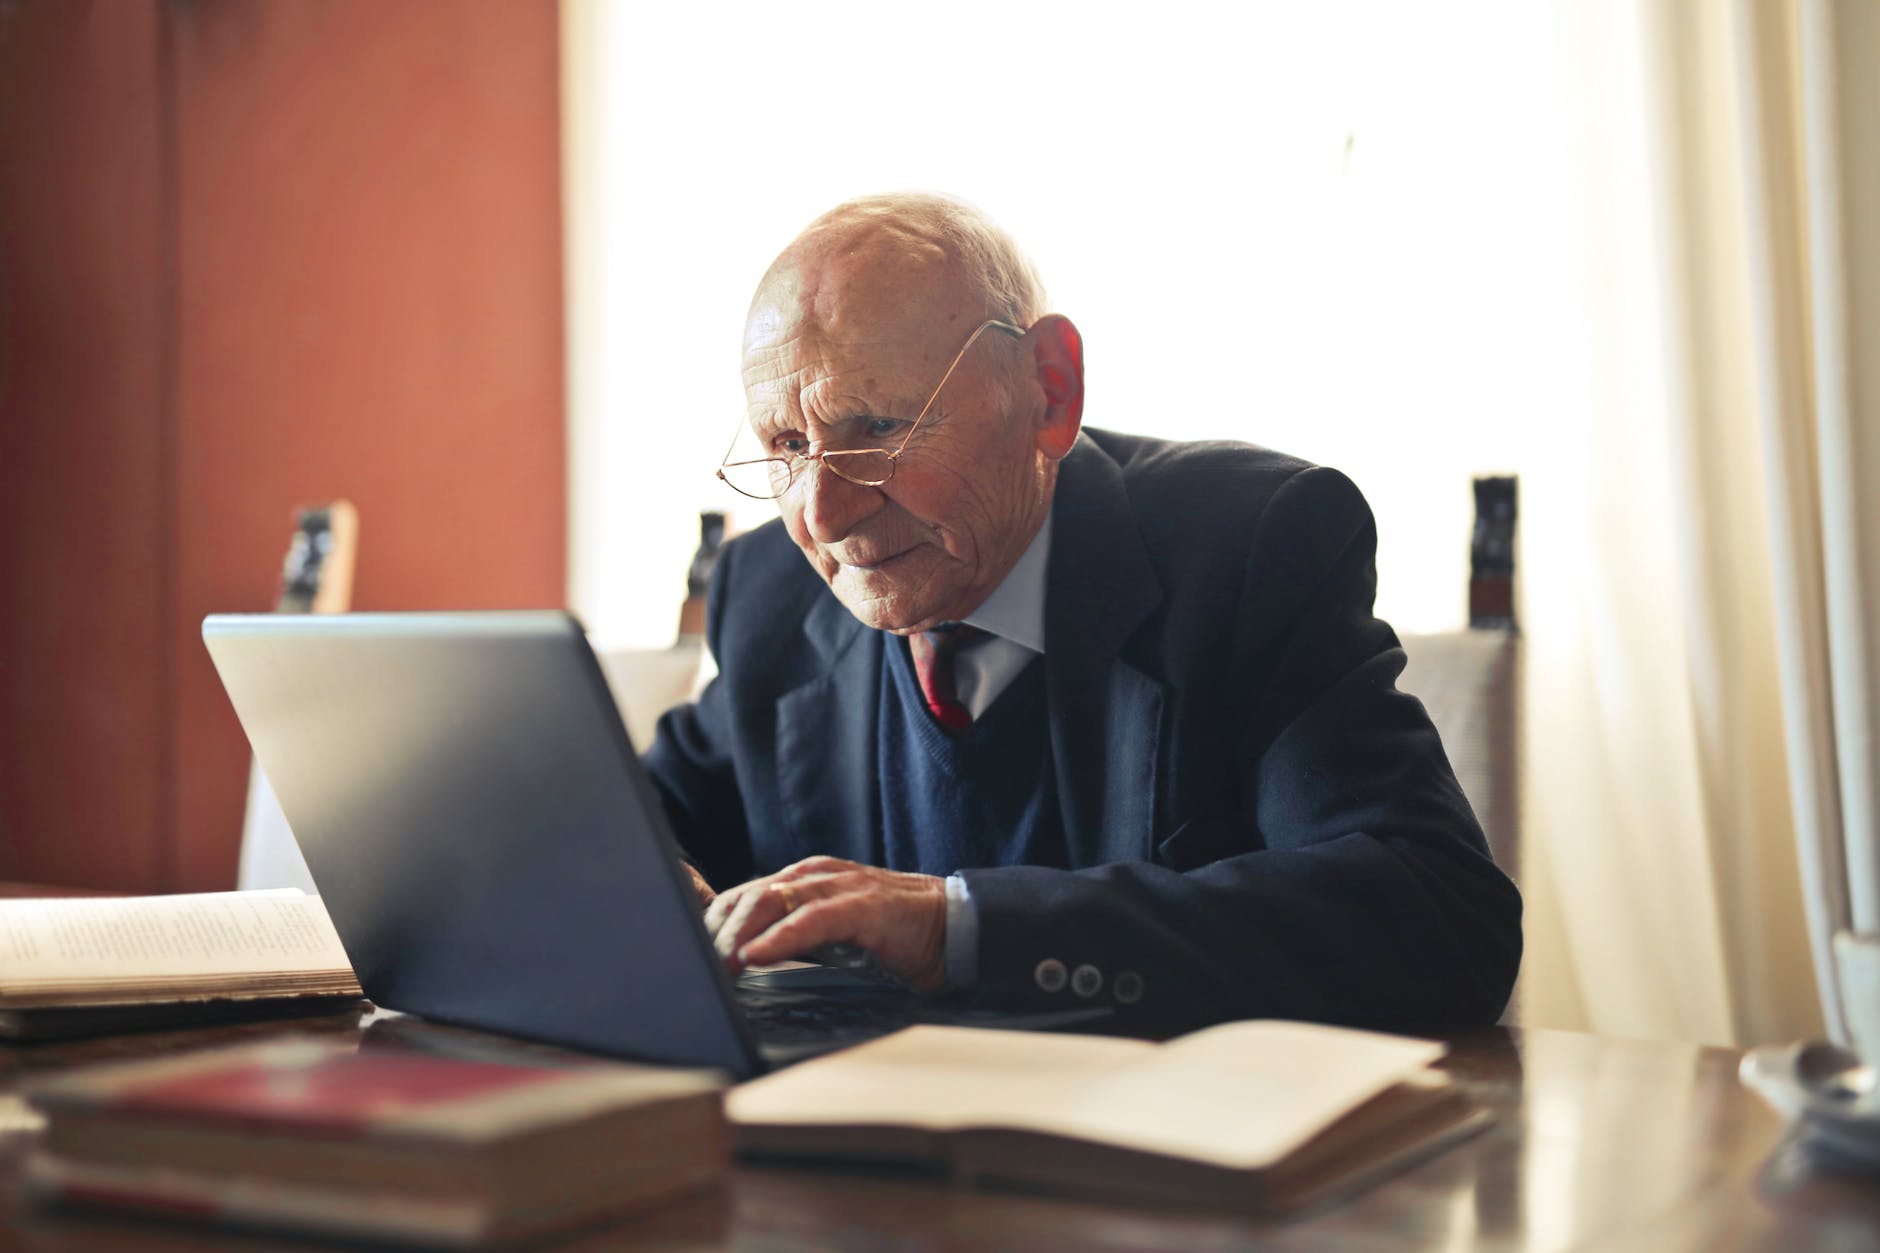 serious senior man in formal suit working on laptop at workplace